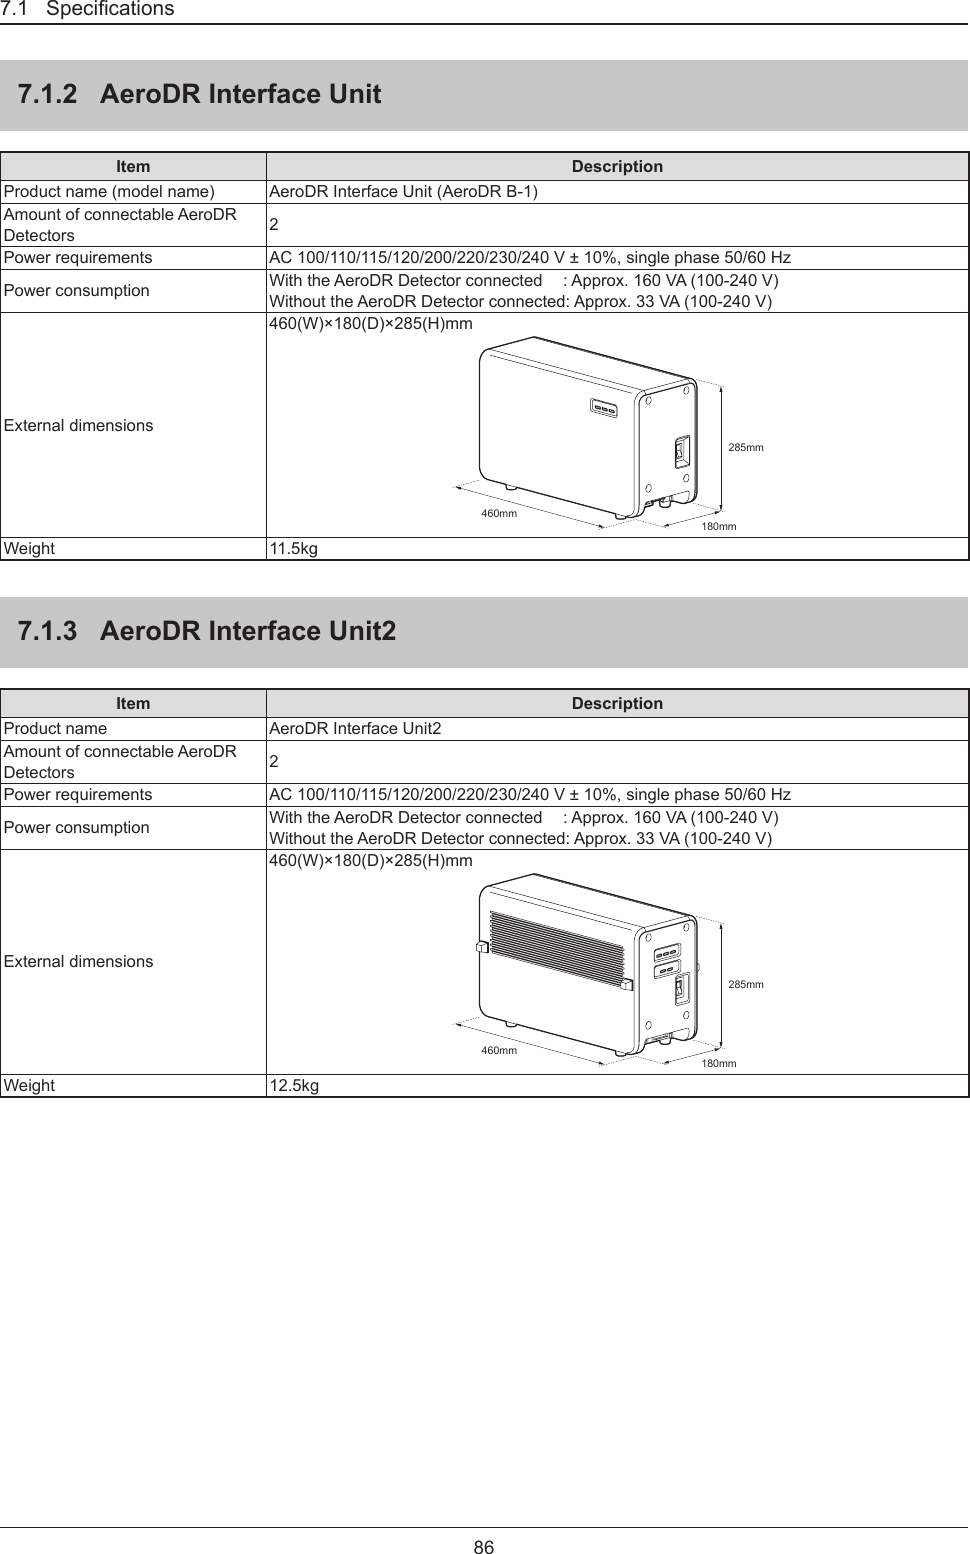 867.1   Specications7.1.2  AeroDR Interface UnitItem DescriptionProduct name (model name) AeroDR Interface Unit (AeroDR B-1)Amount of connectable AeroDR Detectors 2Power requirements AC 100/110/115/120/200/220/230/240 V ± 10%, single phase 50/60 HzPower consumption With the AeroDR Detector connected  : Approx. 160 VA (100-240 V)Without the AeroDR Detector connected: Approx. 33 VA (100-240 V)External dimensions460(W)×180(D)×285(H)mm180mm460mm285mmWeight 11.5kg7.1.3  AeroDR Interface Unit2Item DescriptionProduct name AeroDR Interface Unit2Amount of connectable AeroDR Detectors 2Power requirements AC 100/110/115/120/200/220/230/240 V ± 10%, single phase 50/60 HzPower consumption With the AeroDR Detector connected  : Approx. 160 VA (100-240 V)Without the AeroDR Detector connected: Approx. 33 VA (100-240 V)External dimensions460(W)×180(D)×285(H)mm180mm460mm285mmWeight 12.5kg